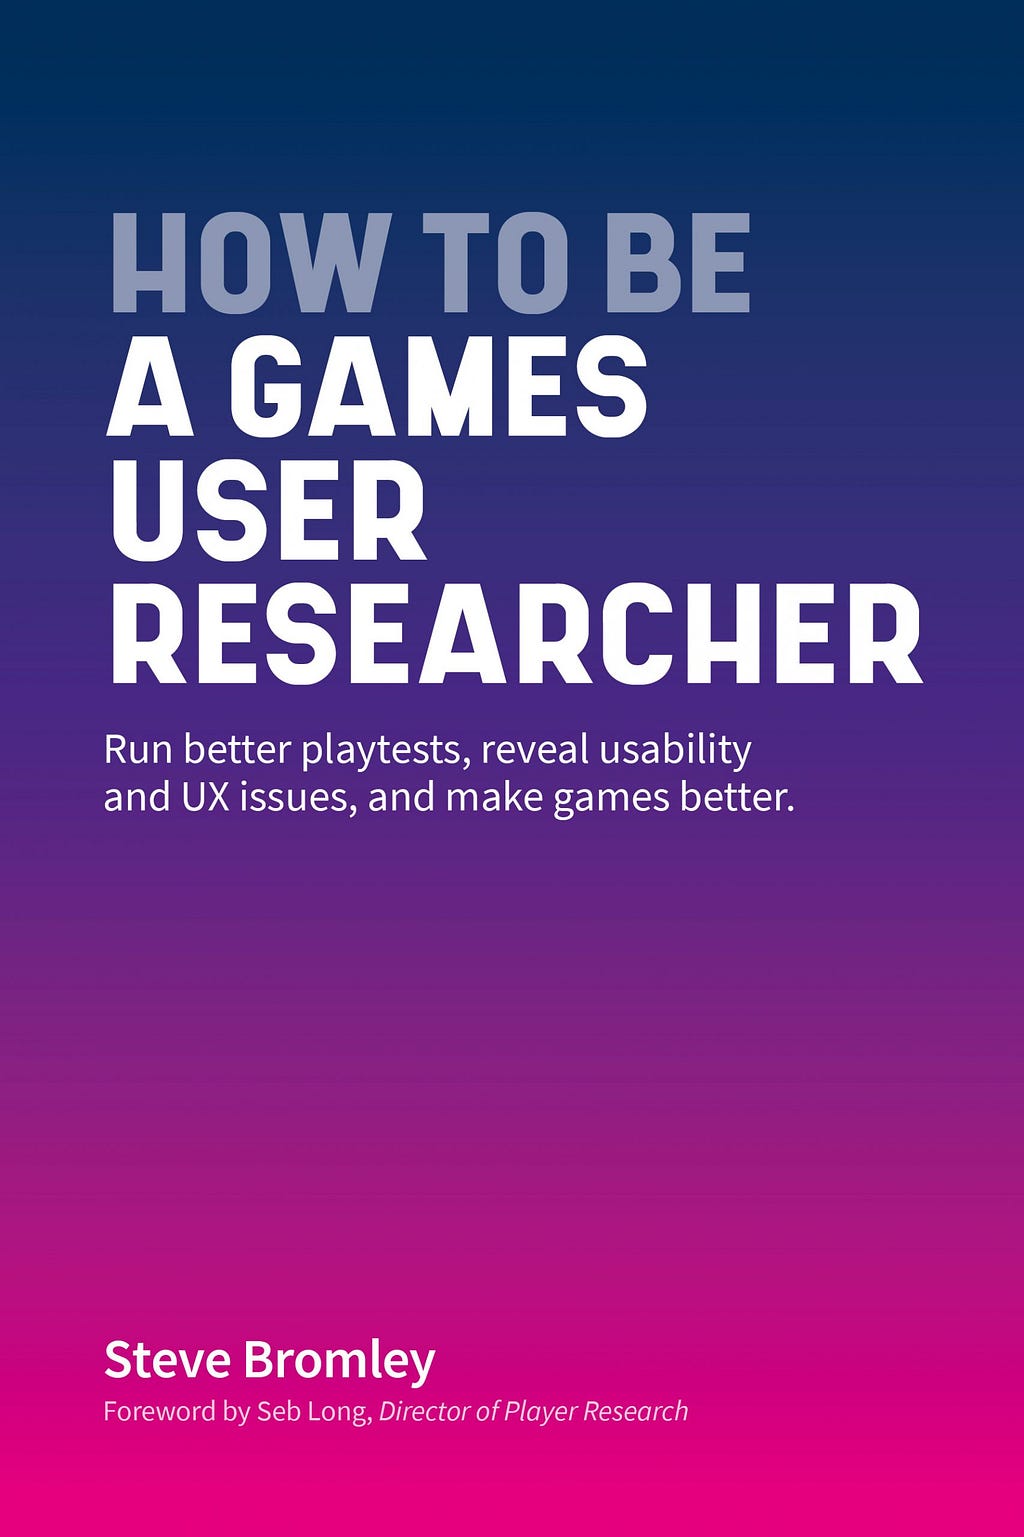 How To Be A Games User Researcher book cover